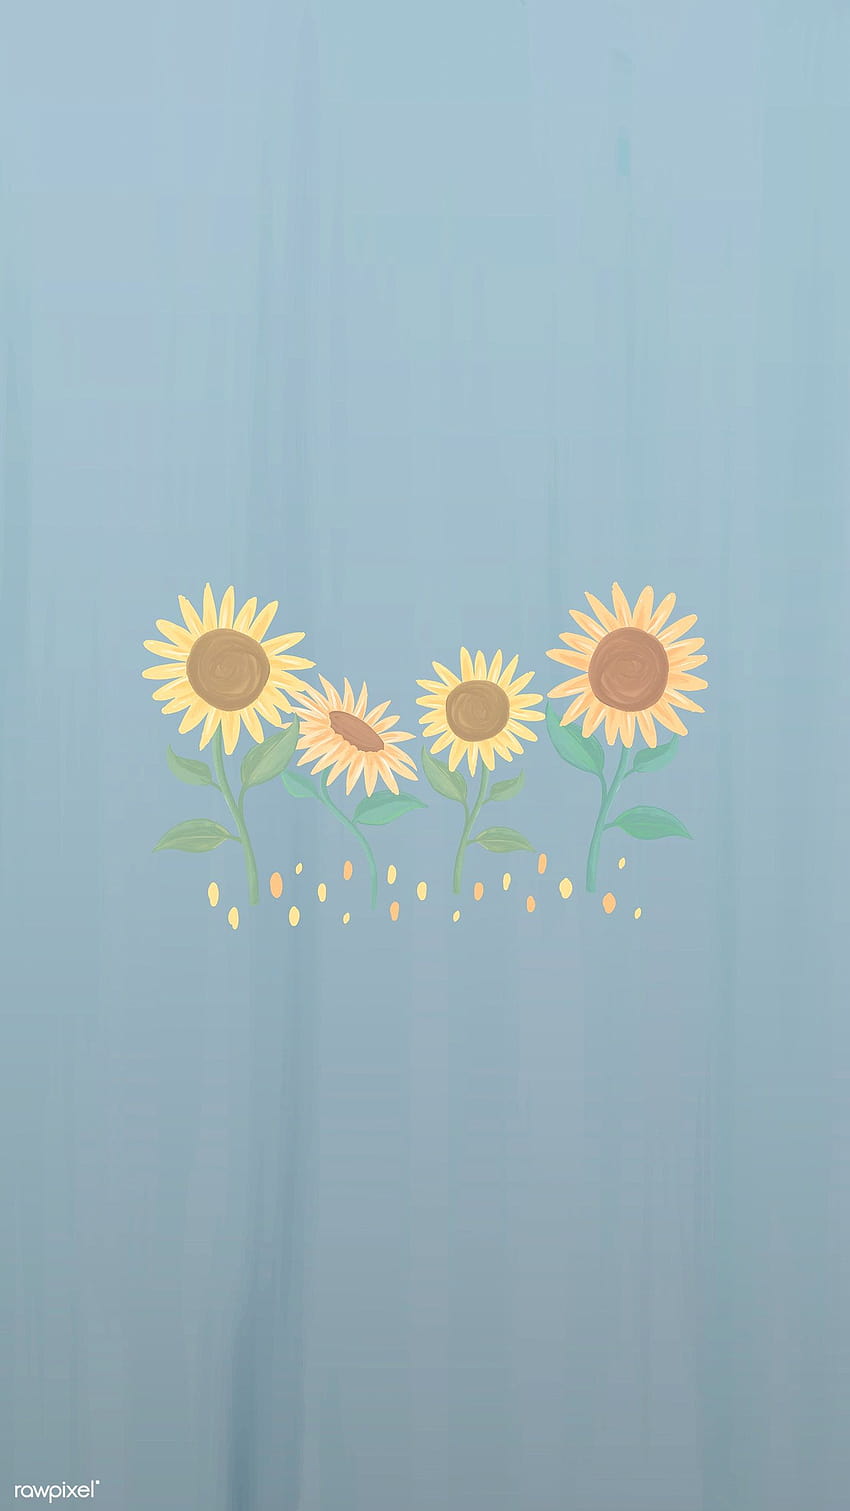 Premium Vector of Hand Drawn Sunflower mobile phone vector by Tang about , ひまわり, ひまわりベクタープリント, 花柄電話パステル, 美的ひまわり 1229950, ひまわり漫画 HD電話の壁紙